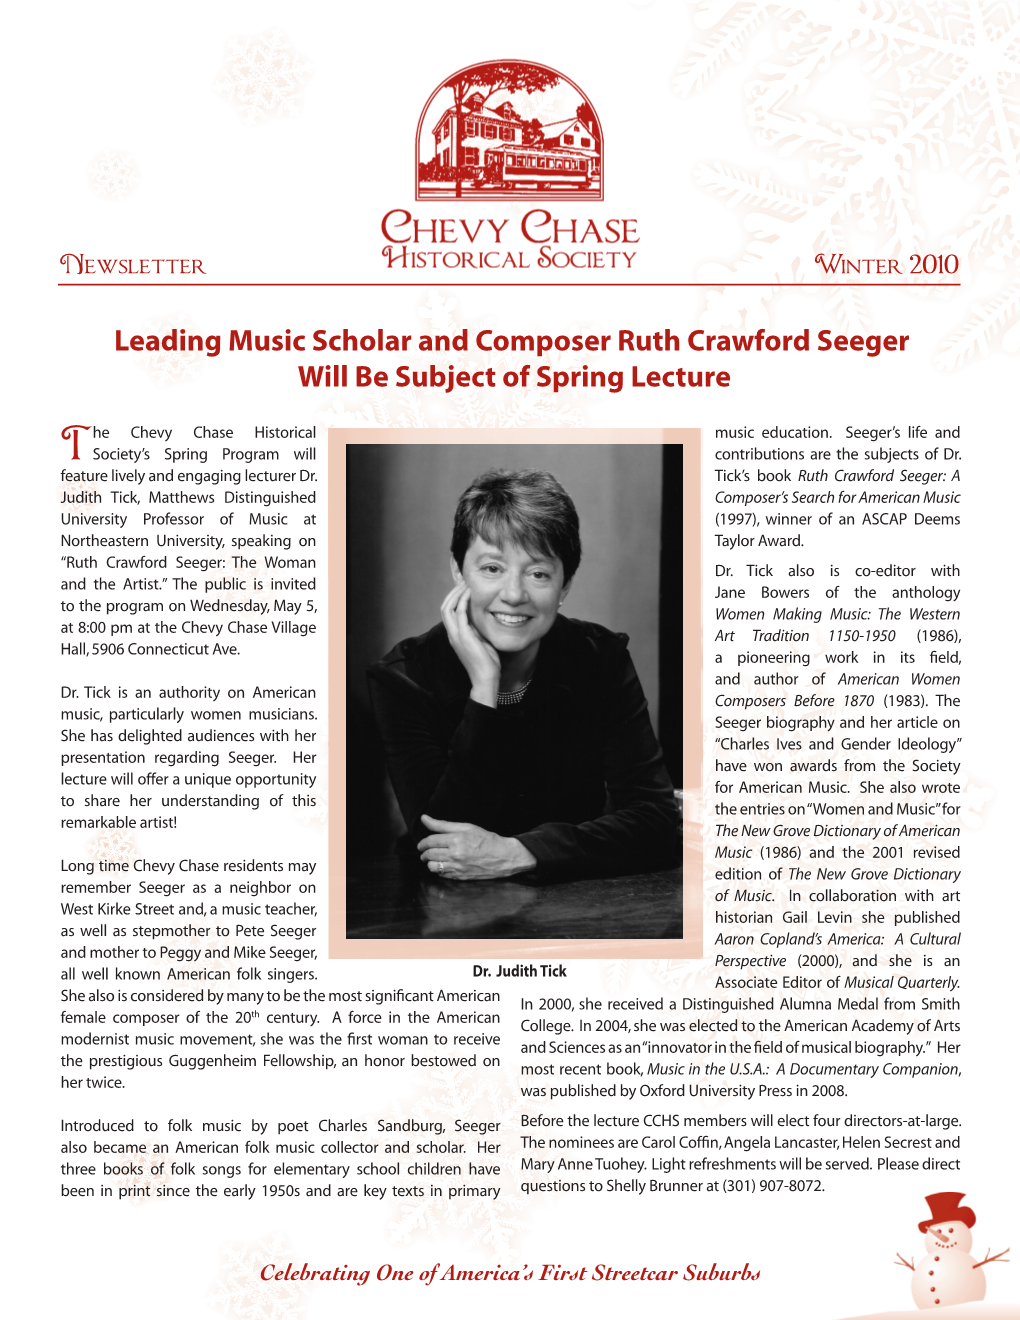 Leading Music Scholar and Composer Ruth Crawford Seeger Will Be Subject of Spring Lecture